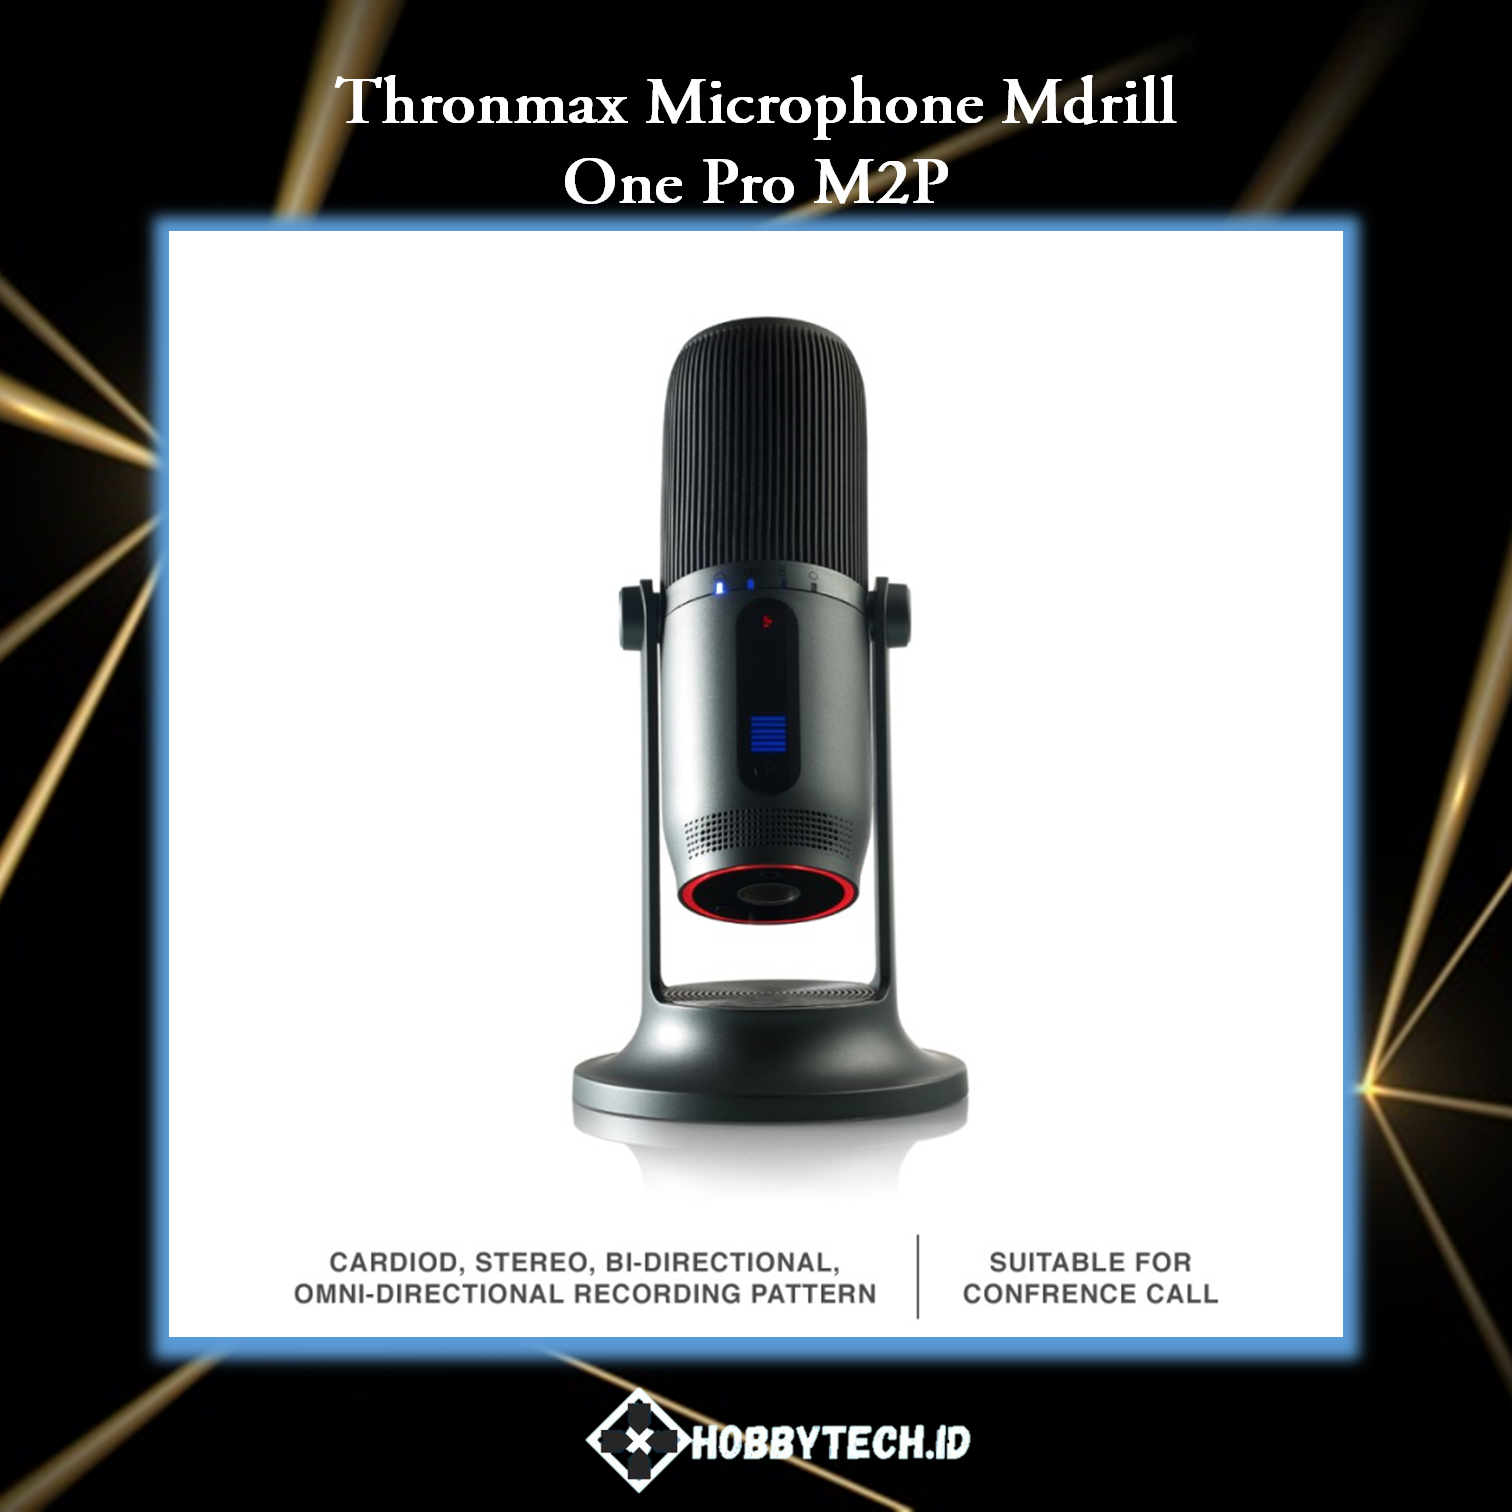 Thronmax Microphone Mdrill One Pro M2 USB M2P